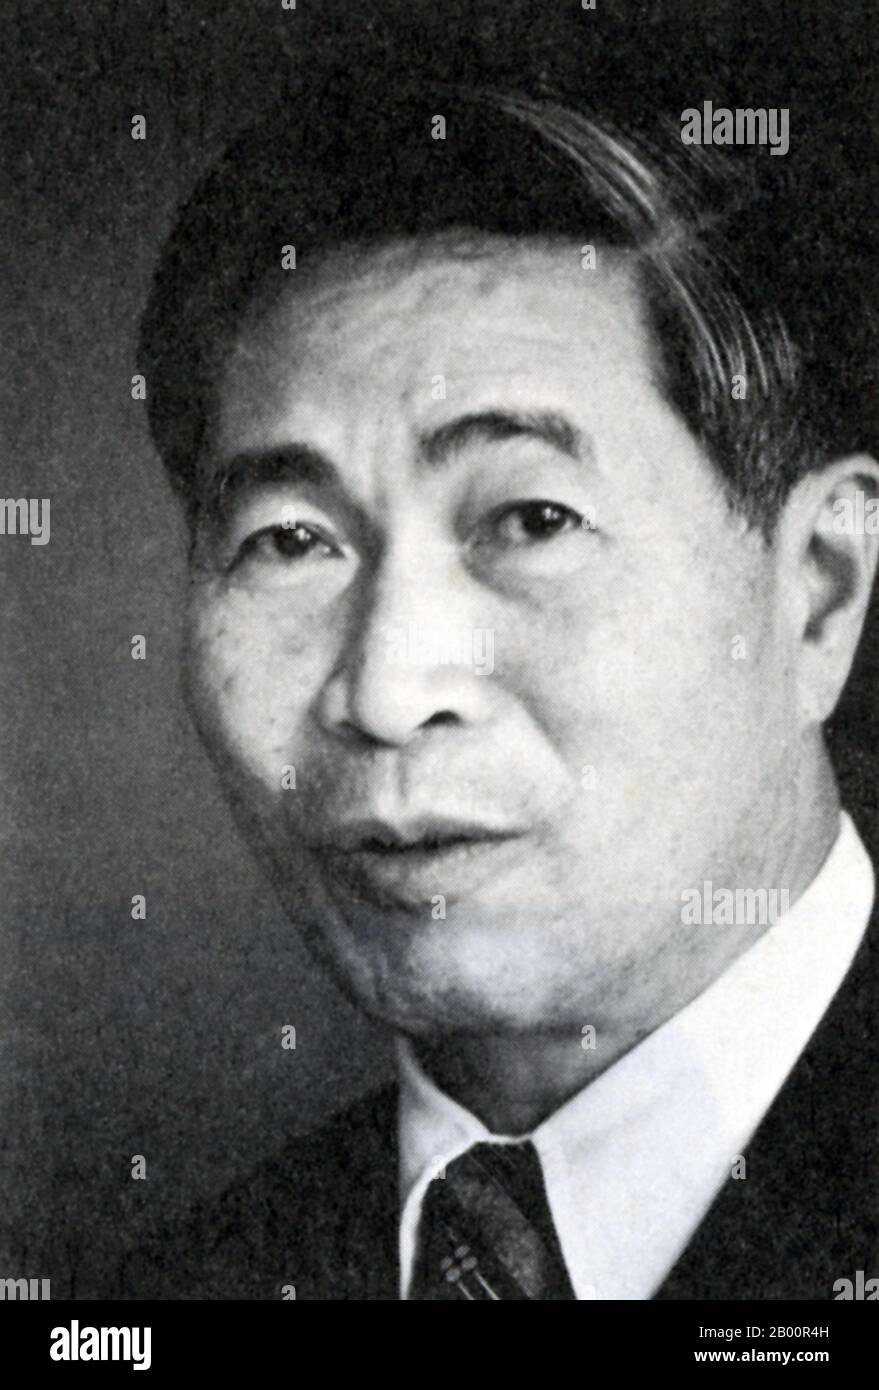 Vietnam: Nguyen Co Thach (1923-1998) foreign minister of Vietnam, 1980-1991.  Nguyen Co Thach (1923-1998) was a Vietnamese revolutionary and diplomat, although he was eventually removed, in 1991, from his post as Foreign Minister and from his seat in the Politburo. He died in 1998. Stock Photo